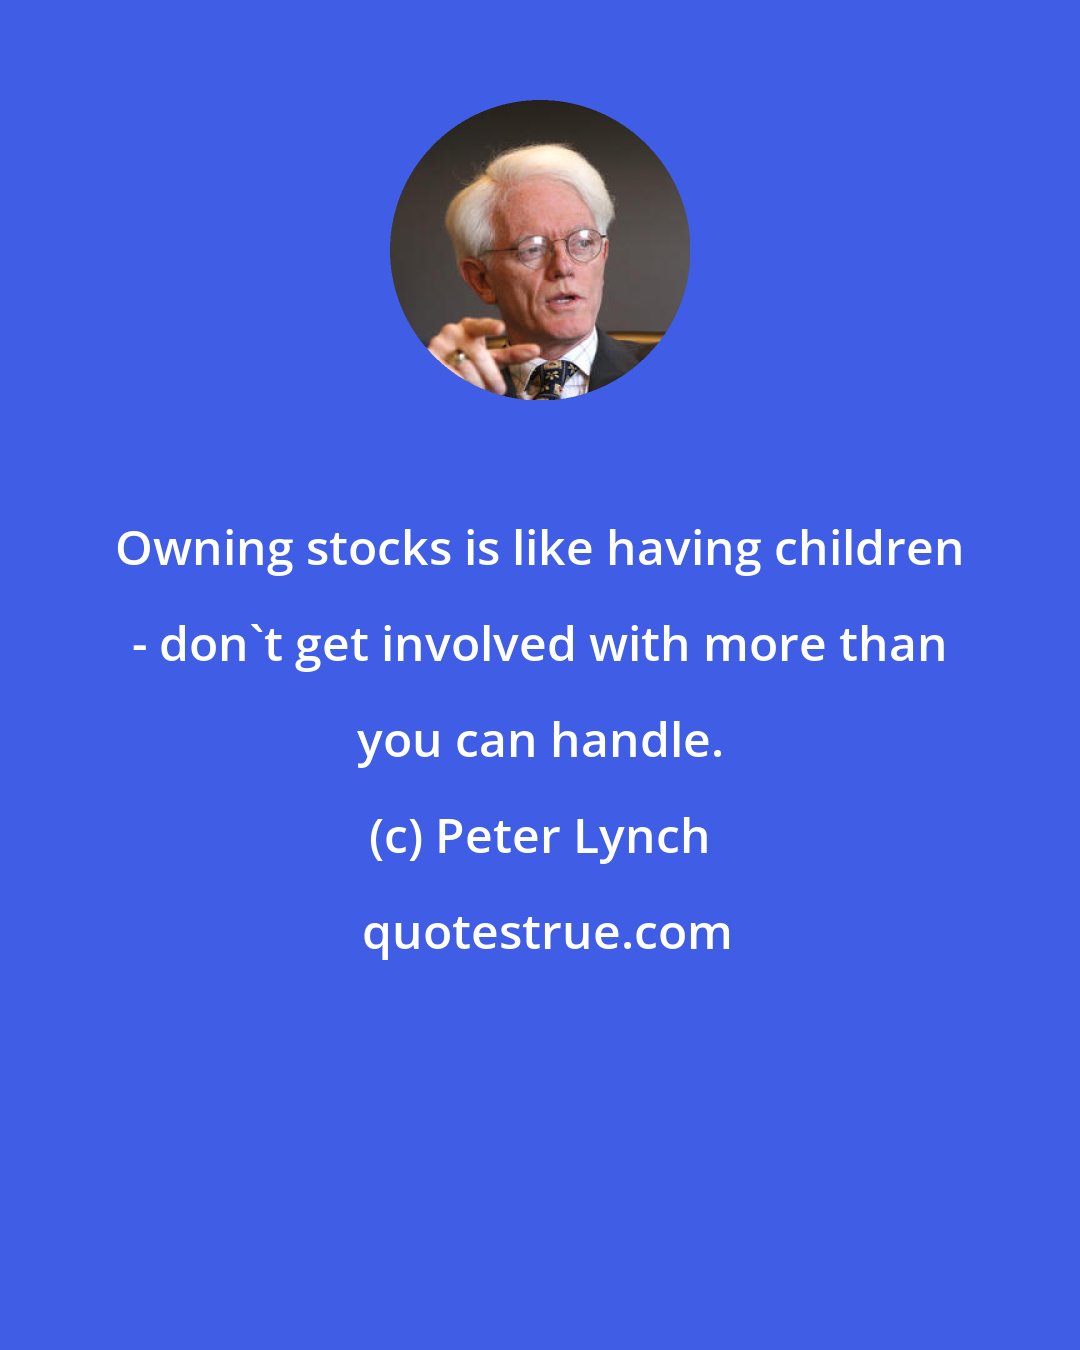 Peter Lynch: Owning stocks is like having children - don't get involved with more than you can handle.